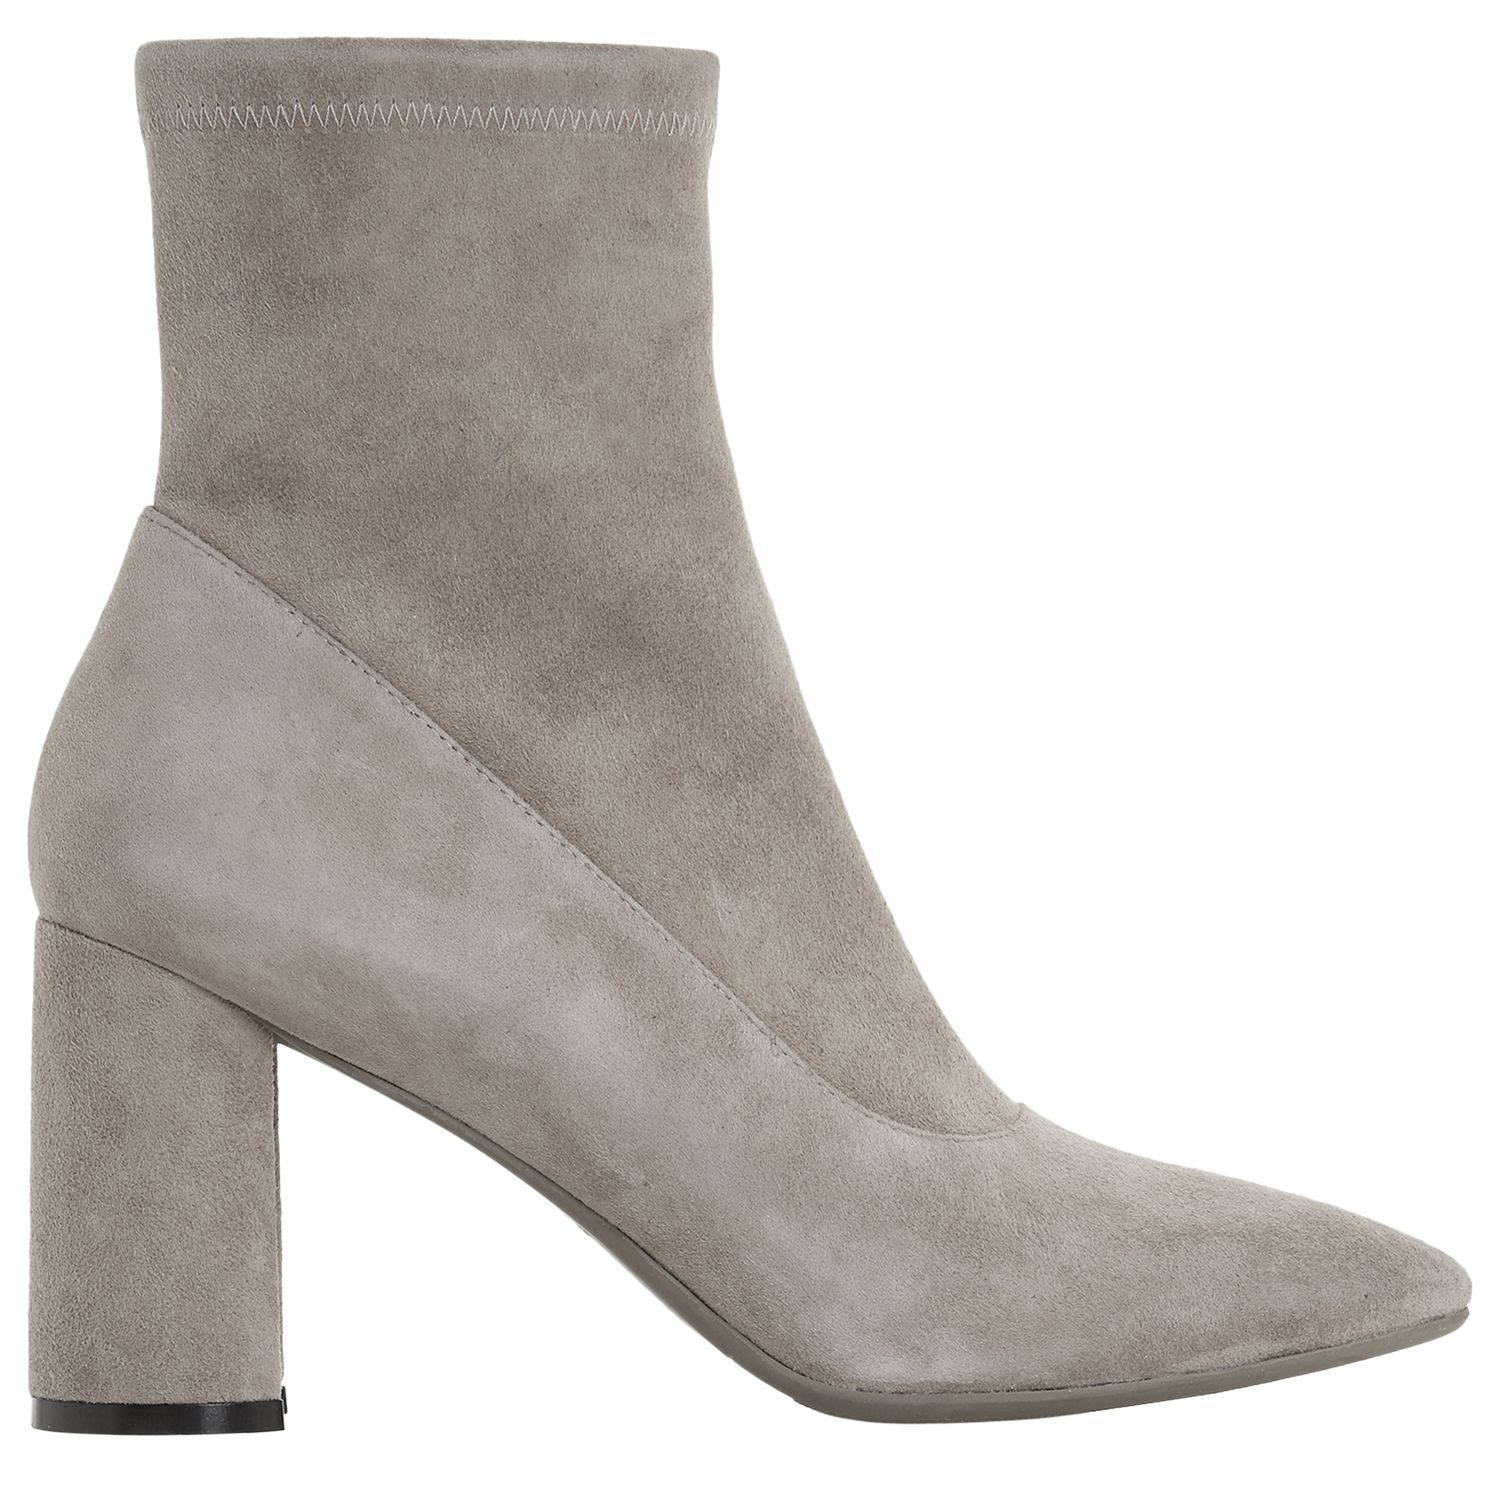 Dune Black Oslowh Block Heel Ankle Boots, Taupe Suede